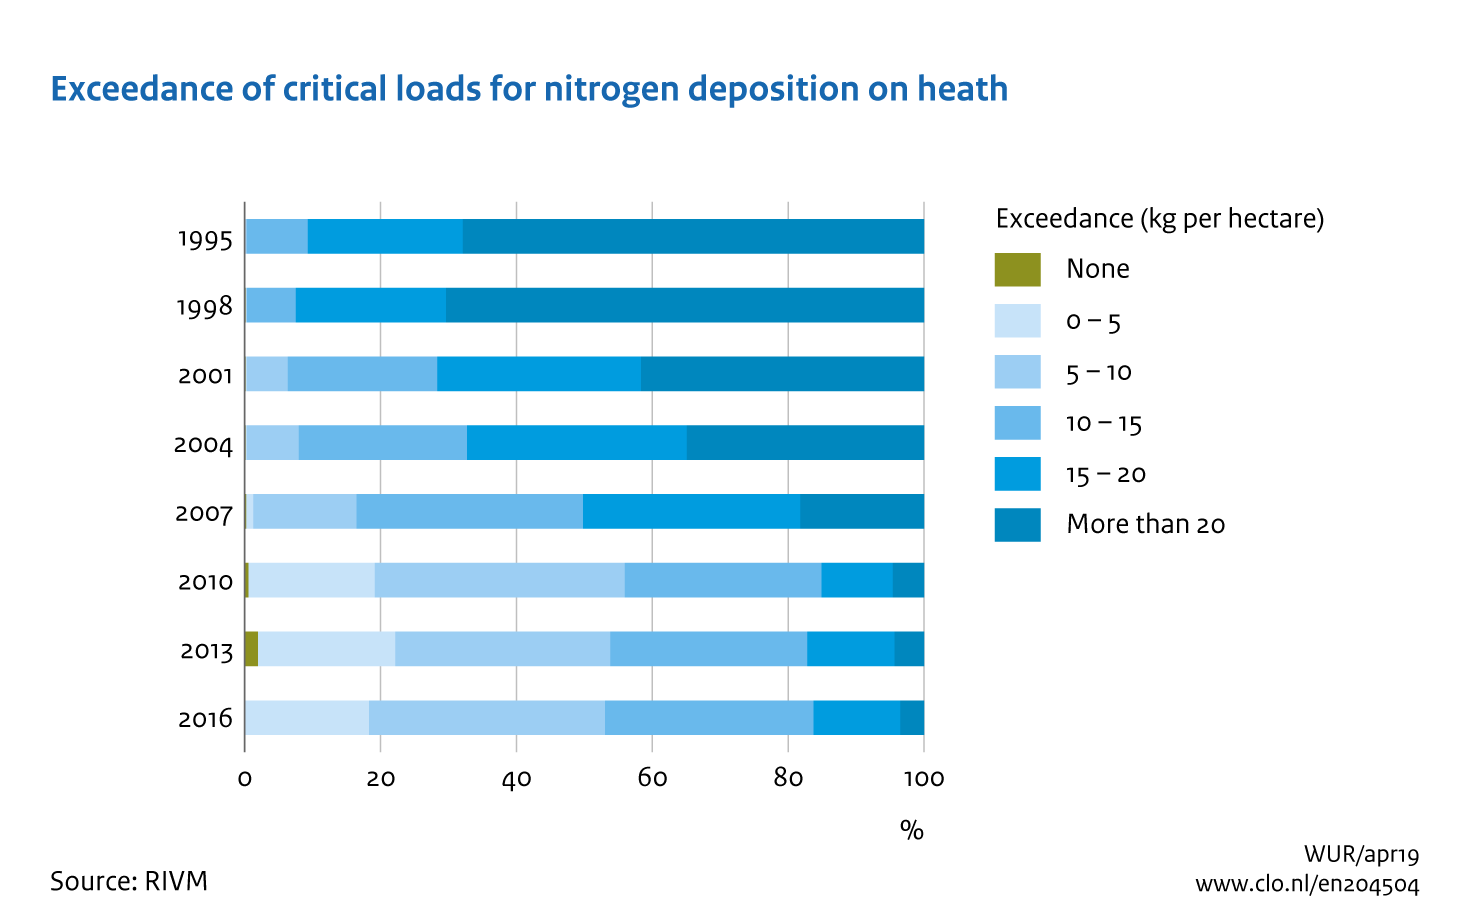 Image Exceedance of critical loads for nitrogen deposition on heath. The image is further explained in the text.